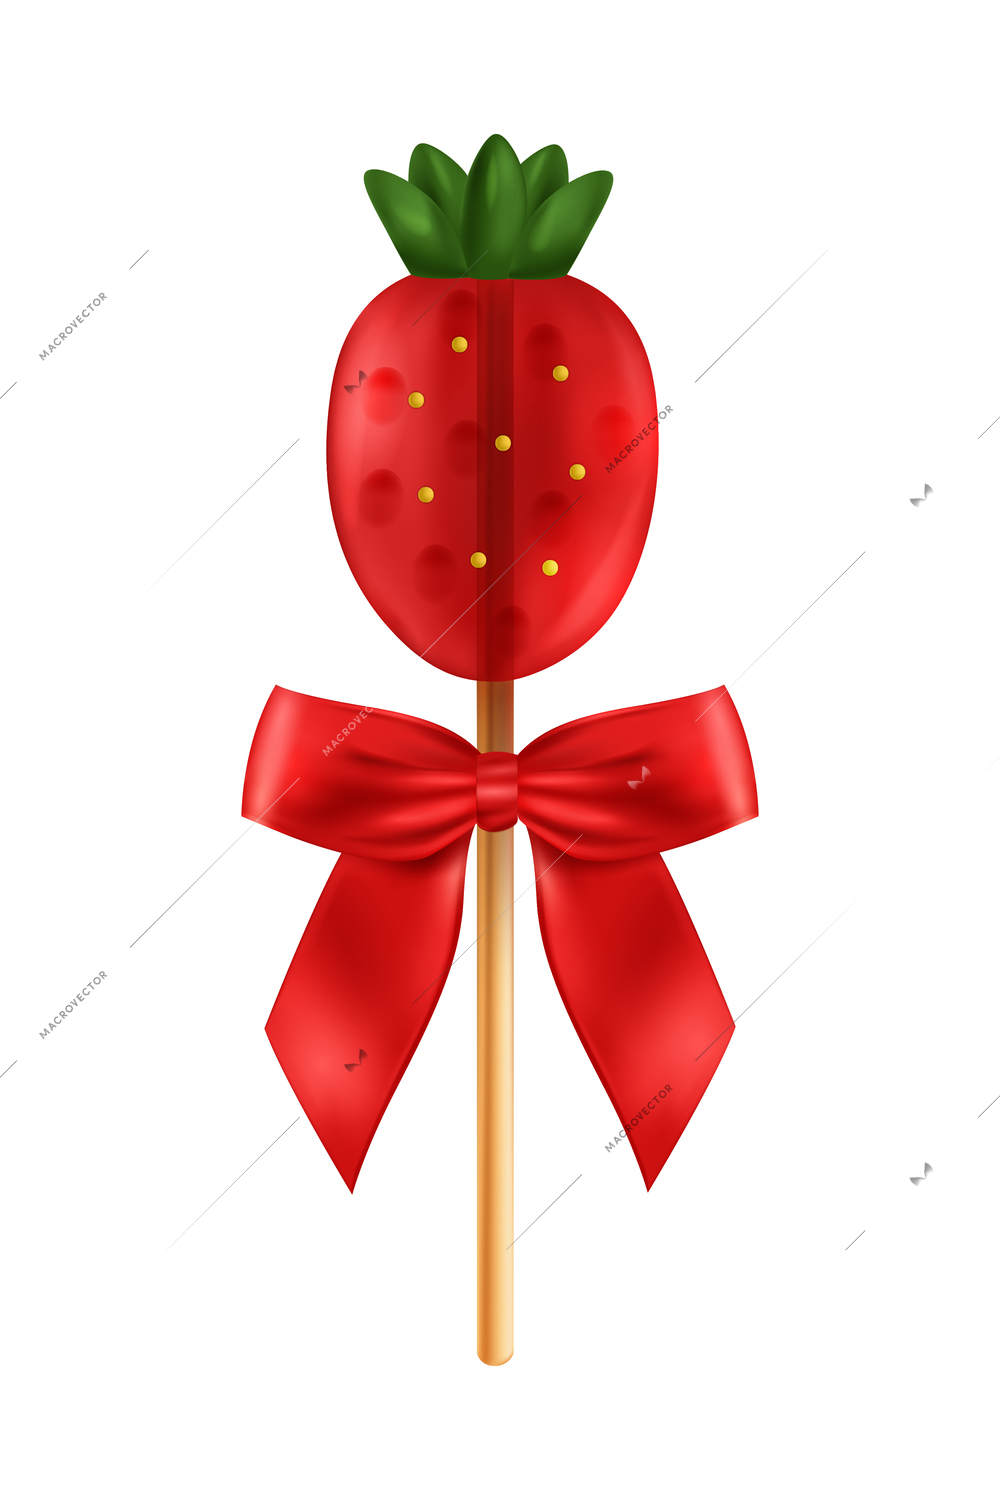 Realistic lollipop red bow composition with isolated image of strawberry shaped candy on stick vector illustration